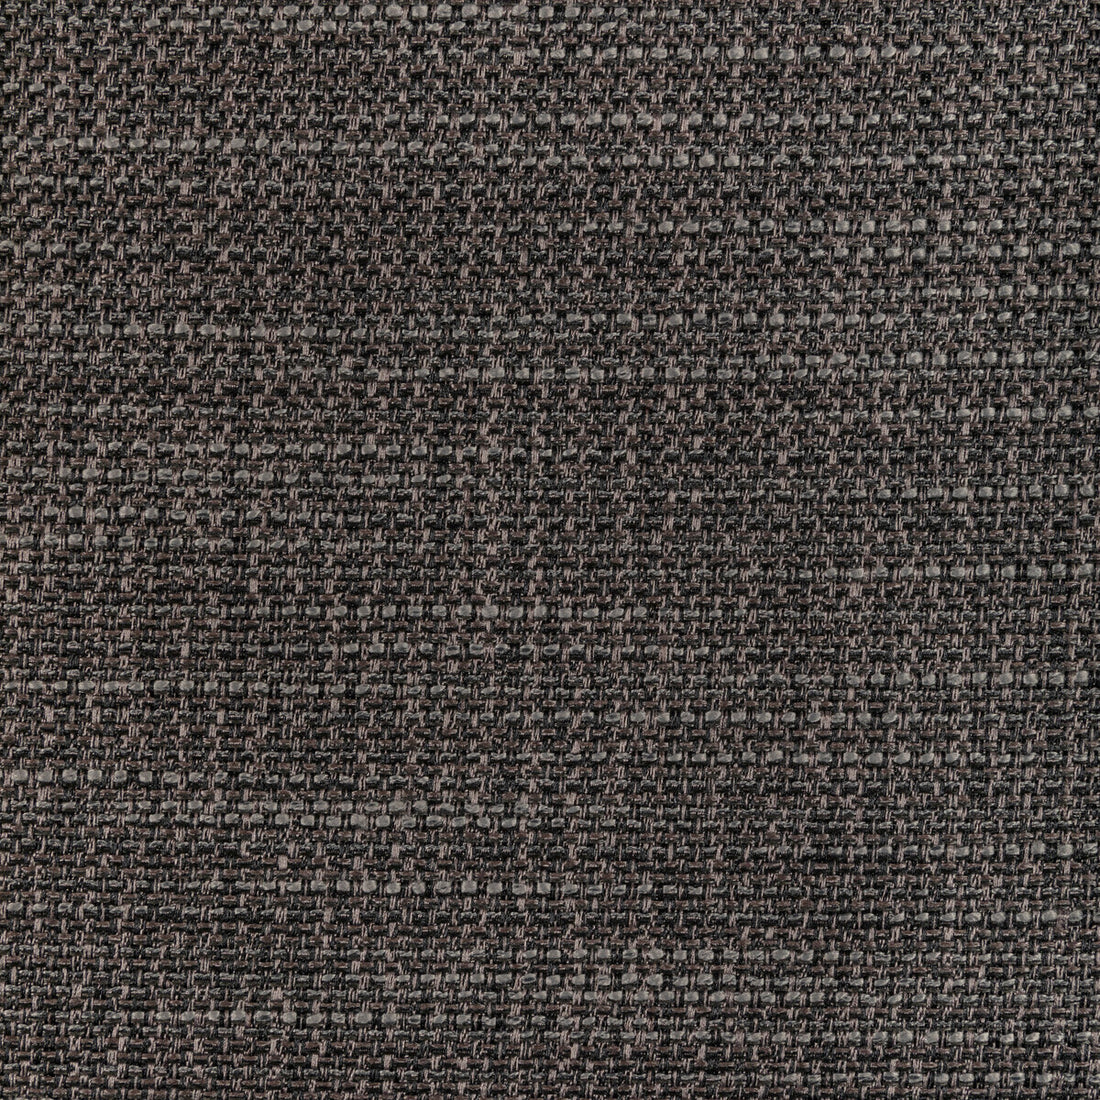 Luma Texture fabric in flint color - pattern 4947.811.0 - by Kravet Contract in the Fr Window Luma Texture collection